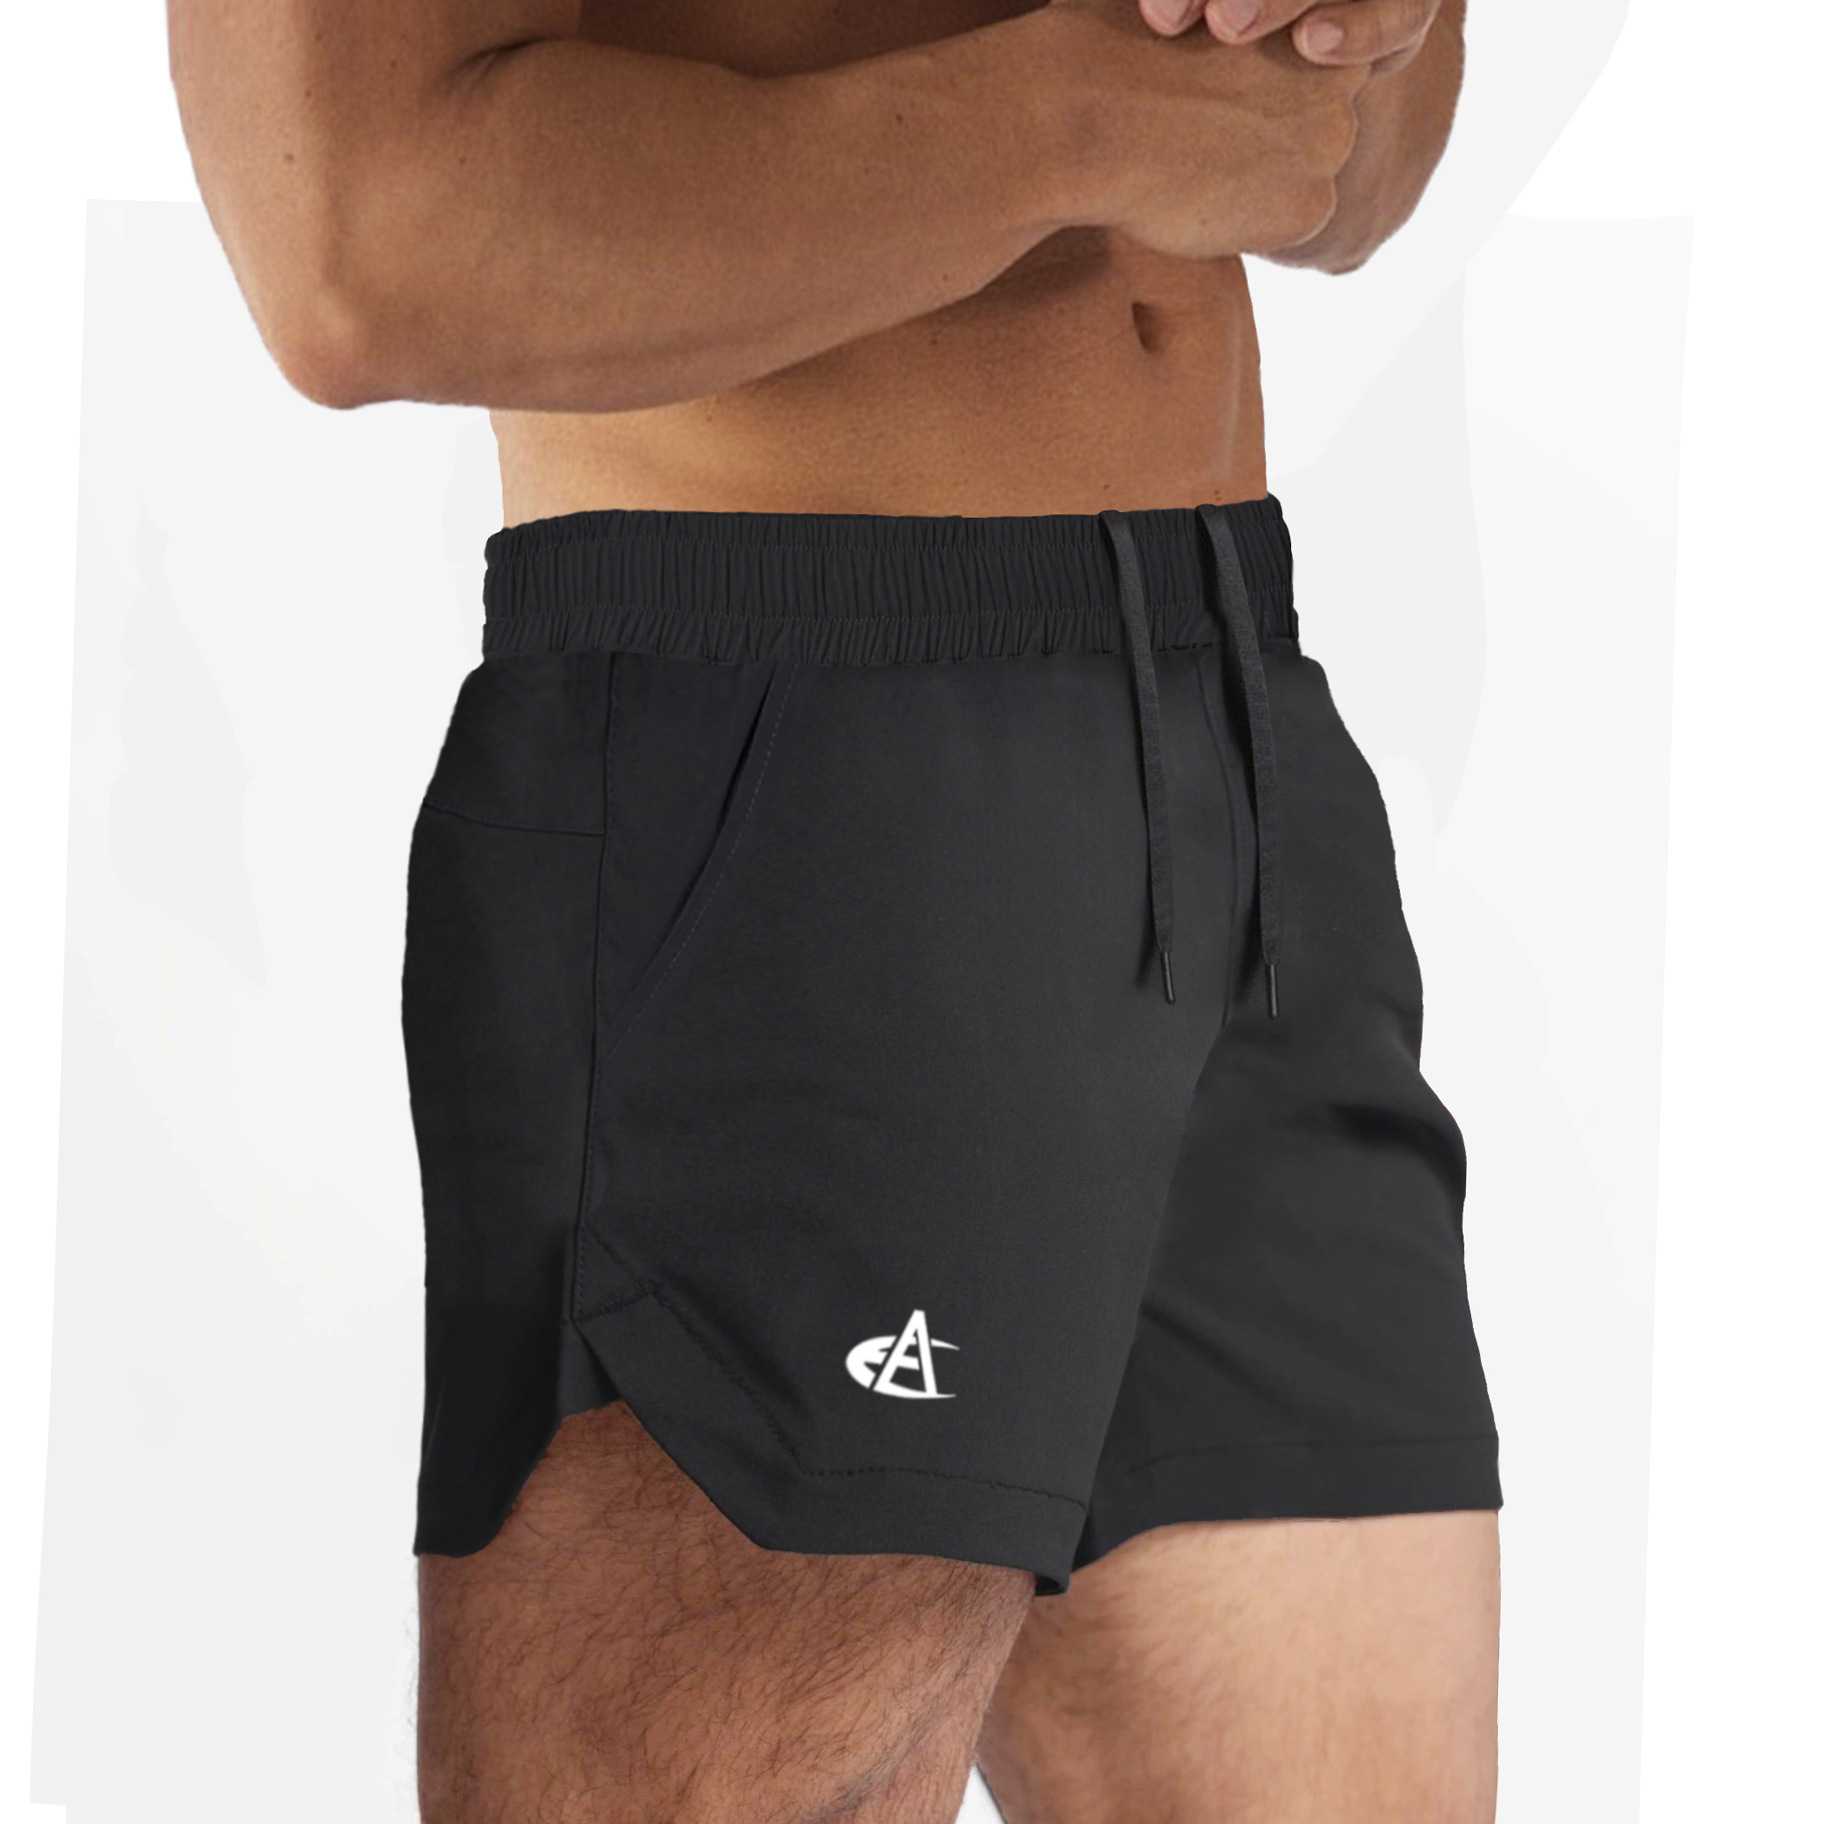 Men's Elastic Quick-Dry Basketball Shorts Essential for Summer Fitness Training